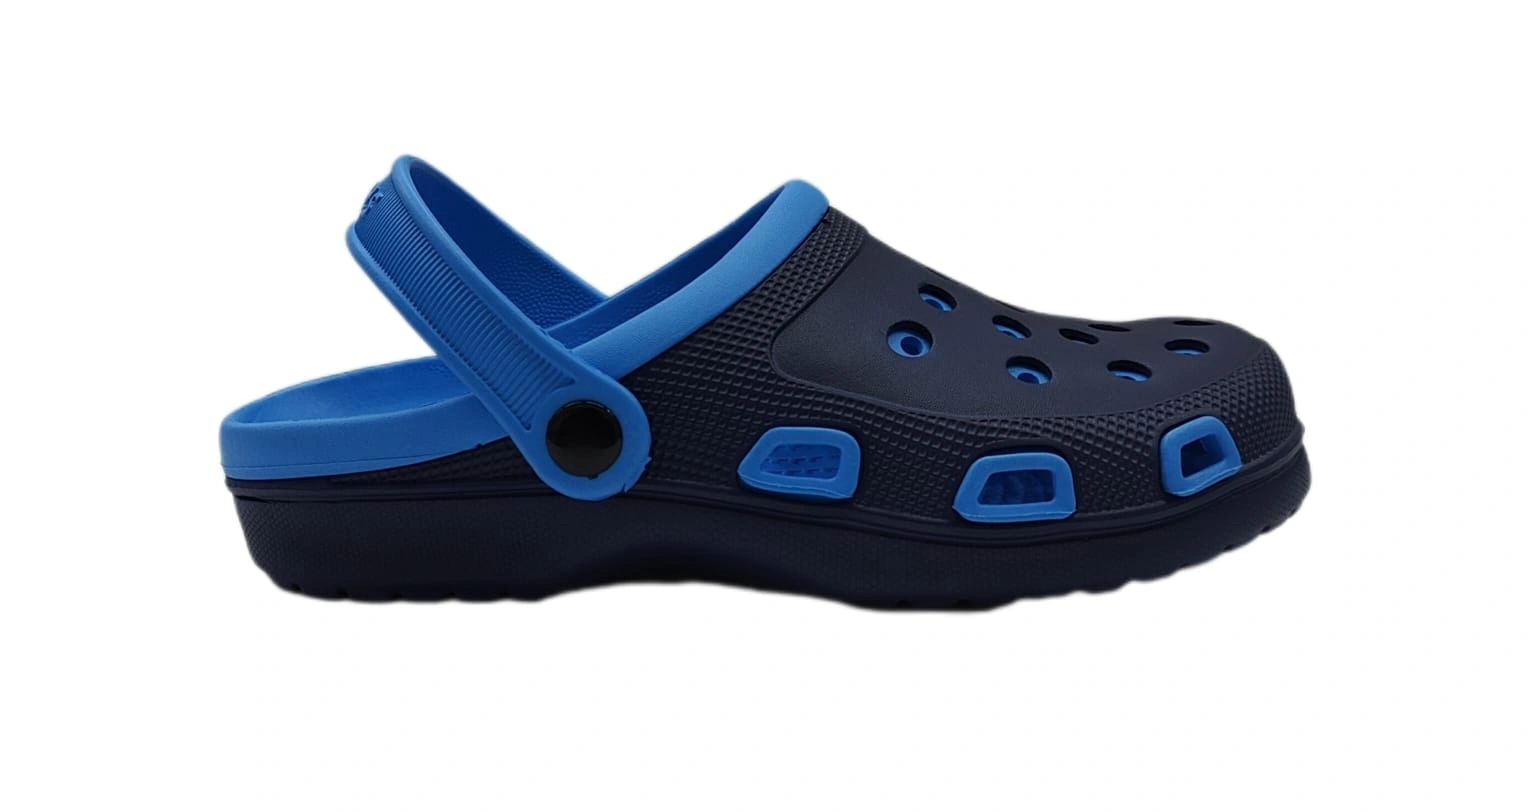 Clog Sandals for Men and Women: Comfortable, Lightweight Design with Durable Upper and Slip-Resistant Outsole for All-Day Wear-Blue-UK6-1